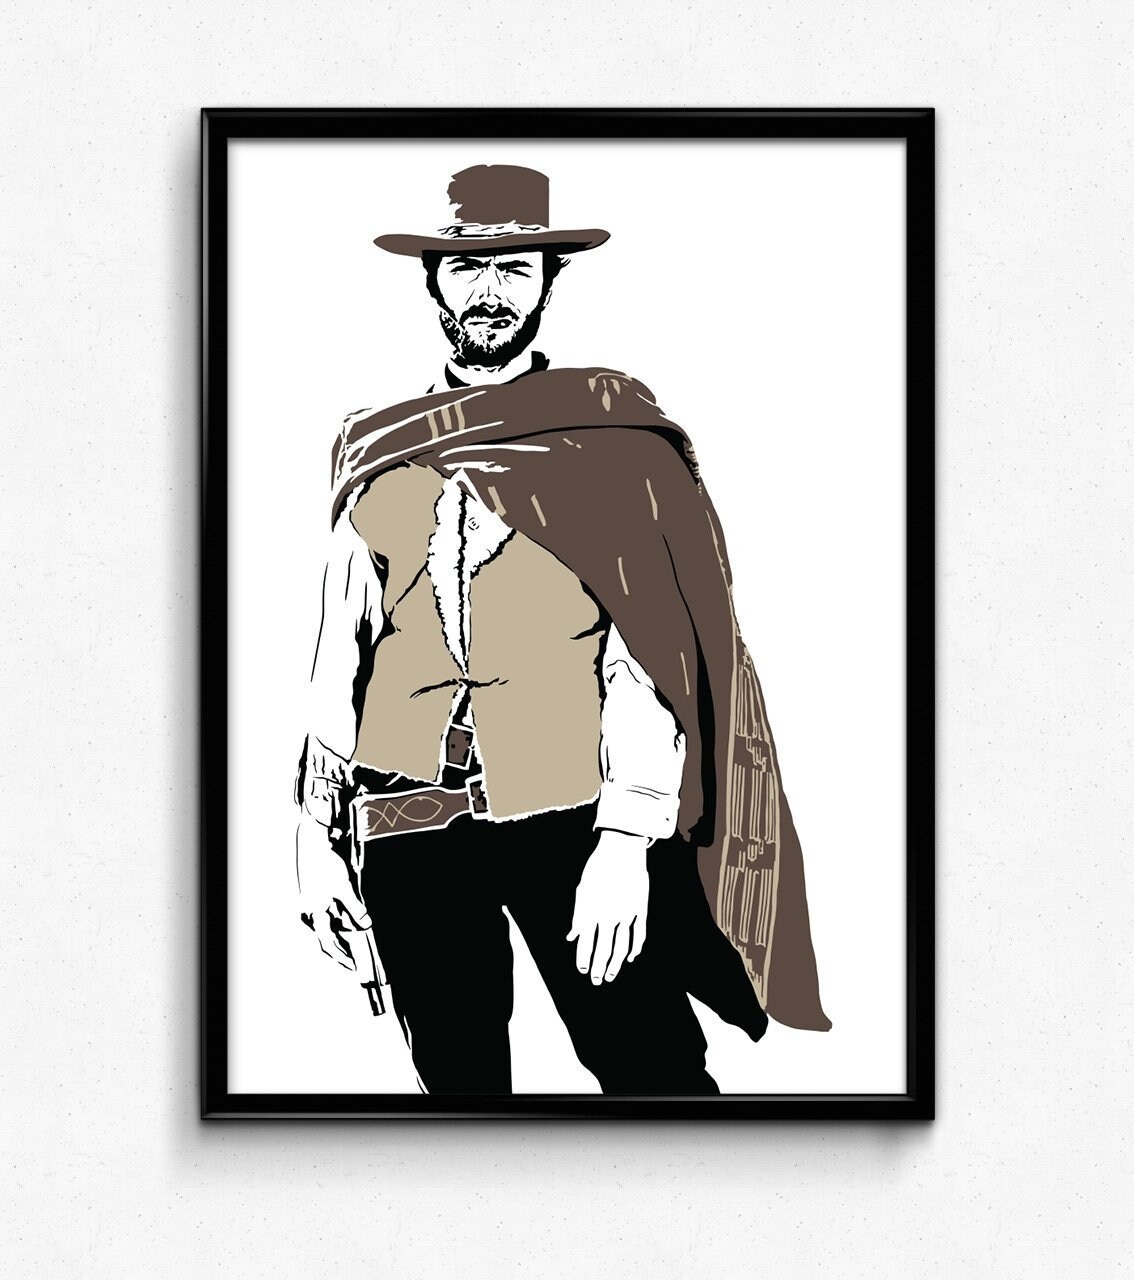 Clint Eastwood Art Print - Rugged Illustration of the Man with No Name  gifts for him  western movie fan  cowboy poster